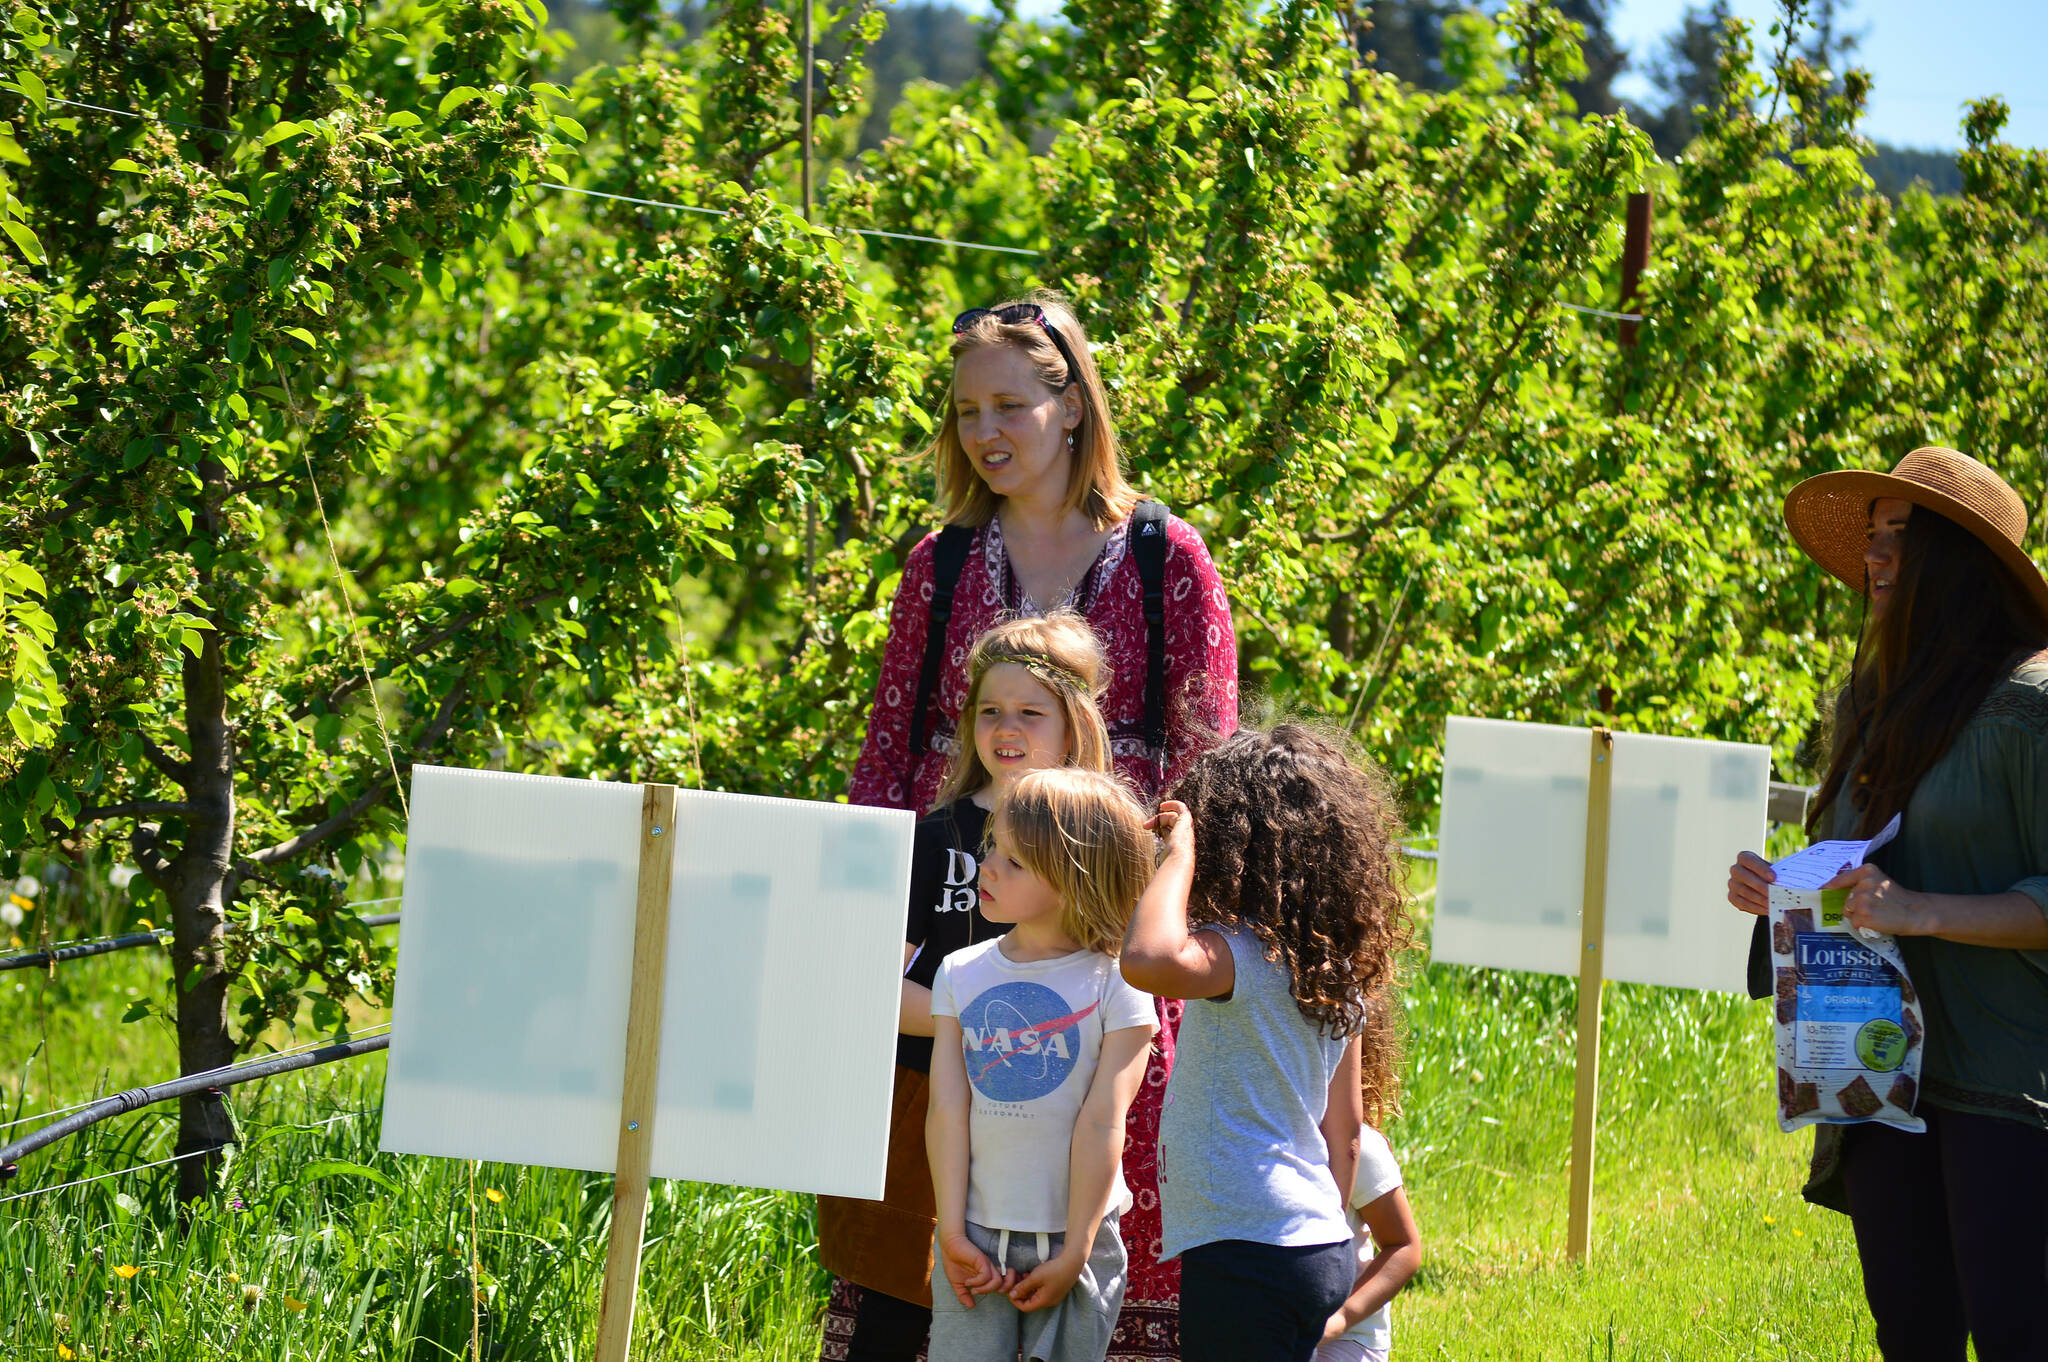 Attendees of a book walk at Finnriver check out signs installed over a mile-long walk. Photo courtesy of Katy Bowman